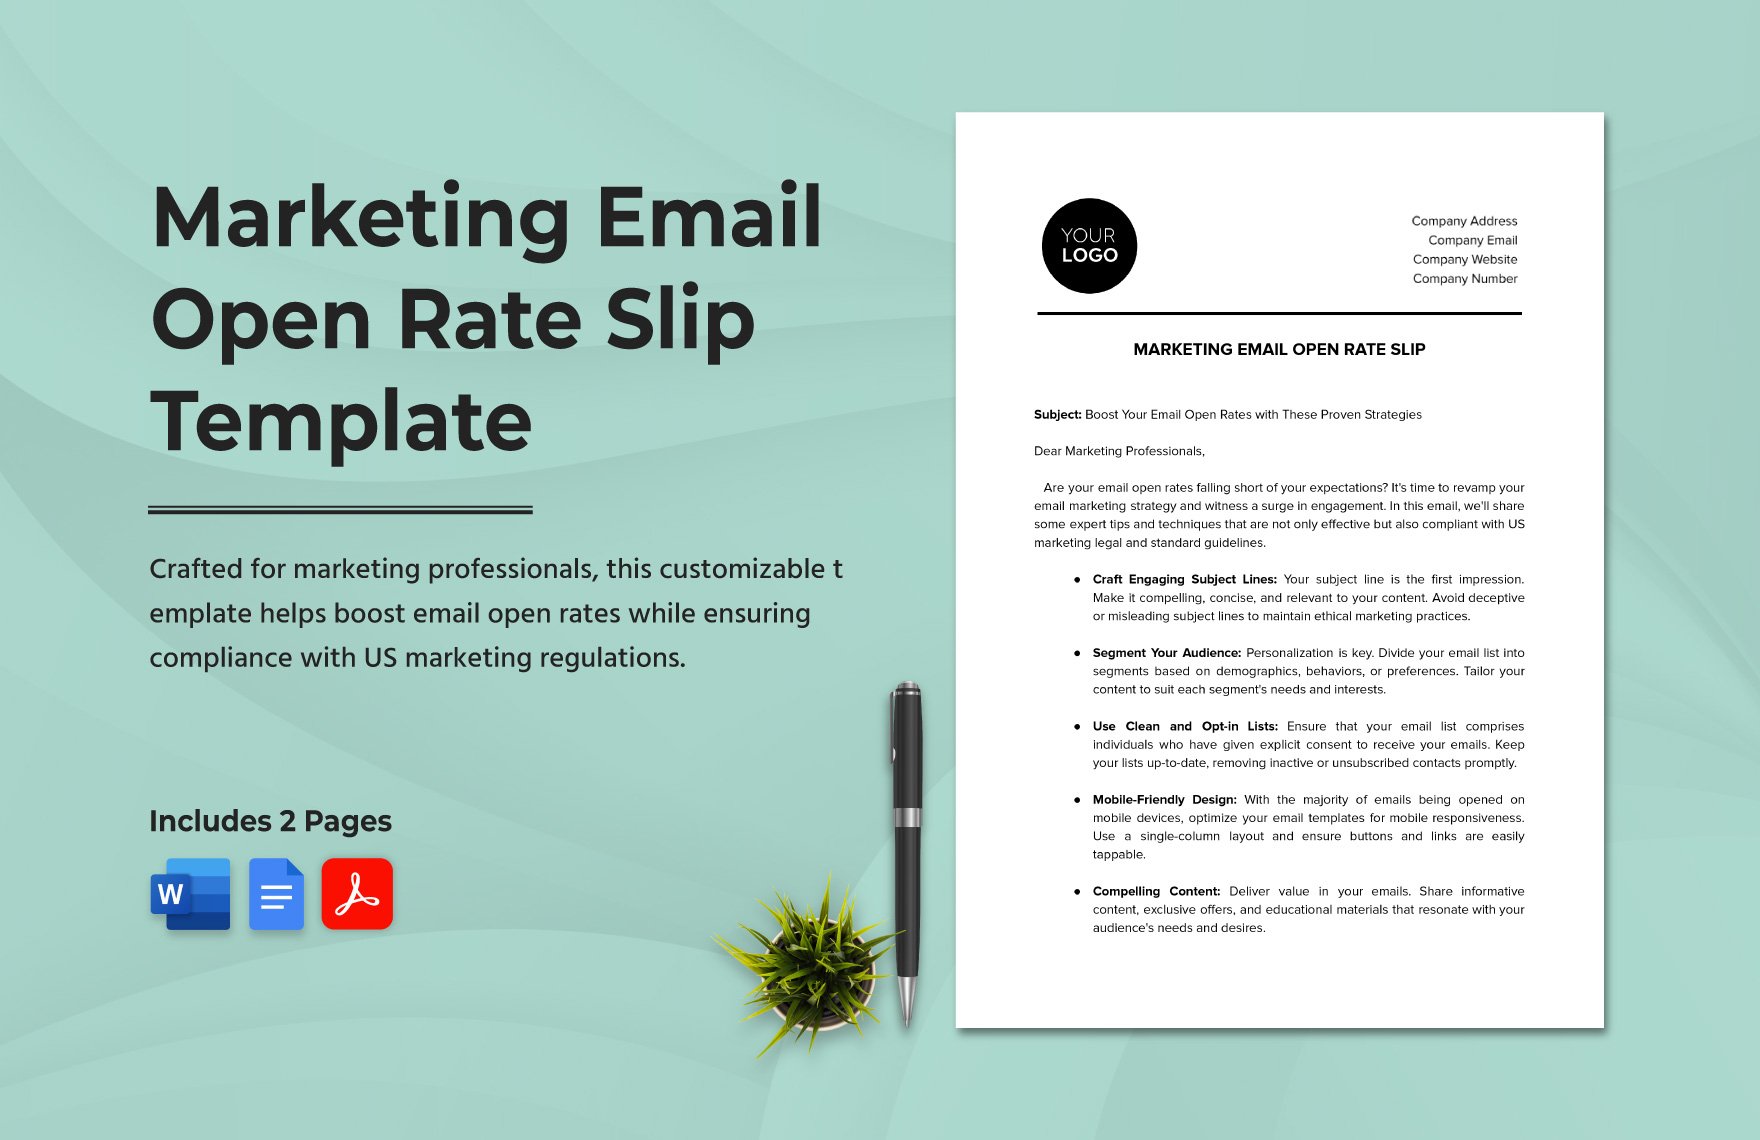 Marketing Email Open Rate Slip Template